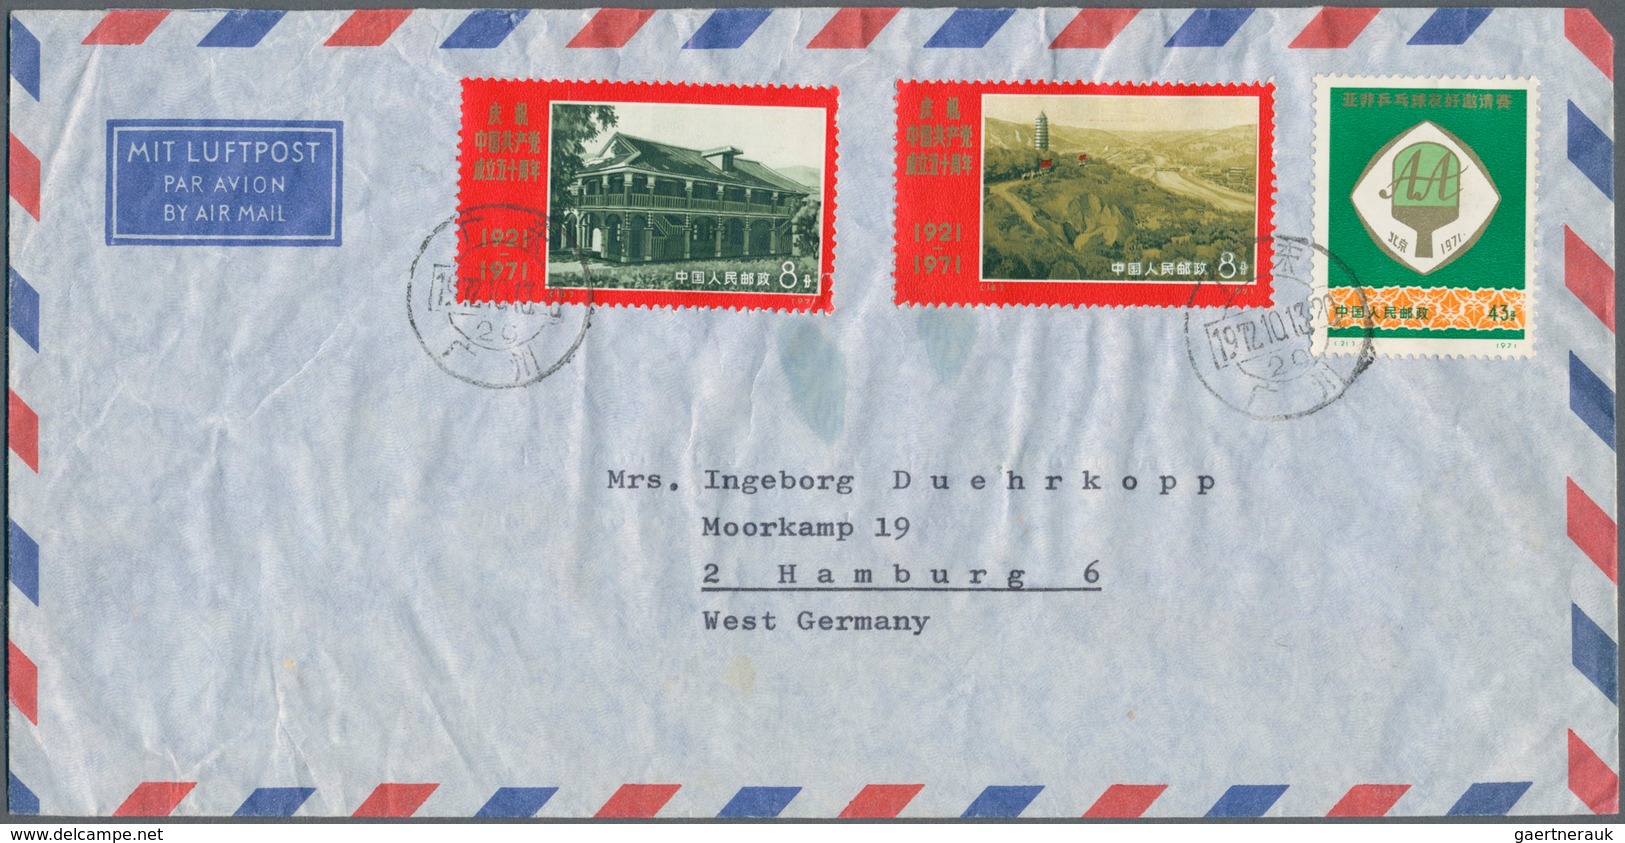 China - Volksrepublik - Ganzsachen: 1971, KPC 50 years stamps on covers (8); Albania 52f. single or